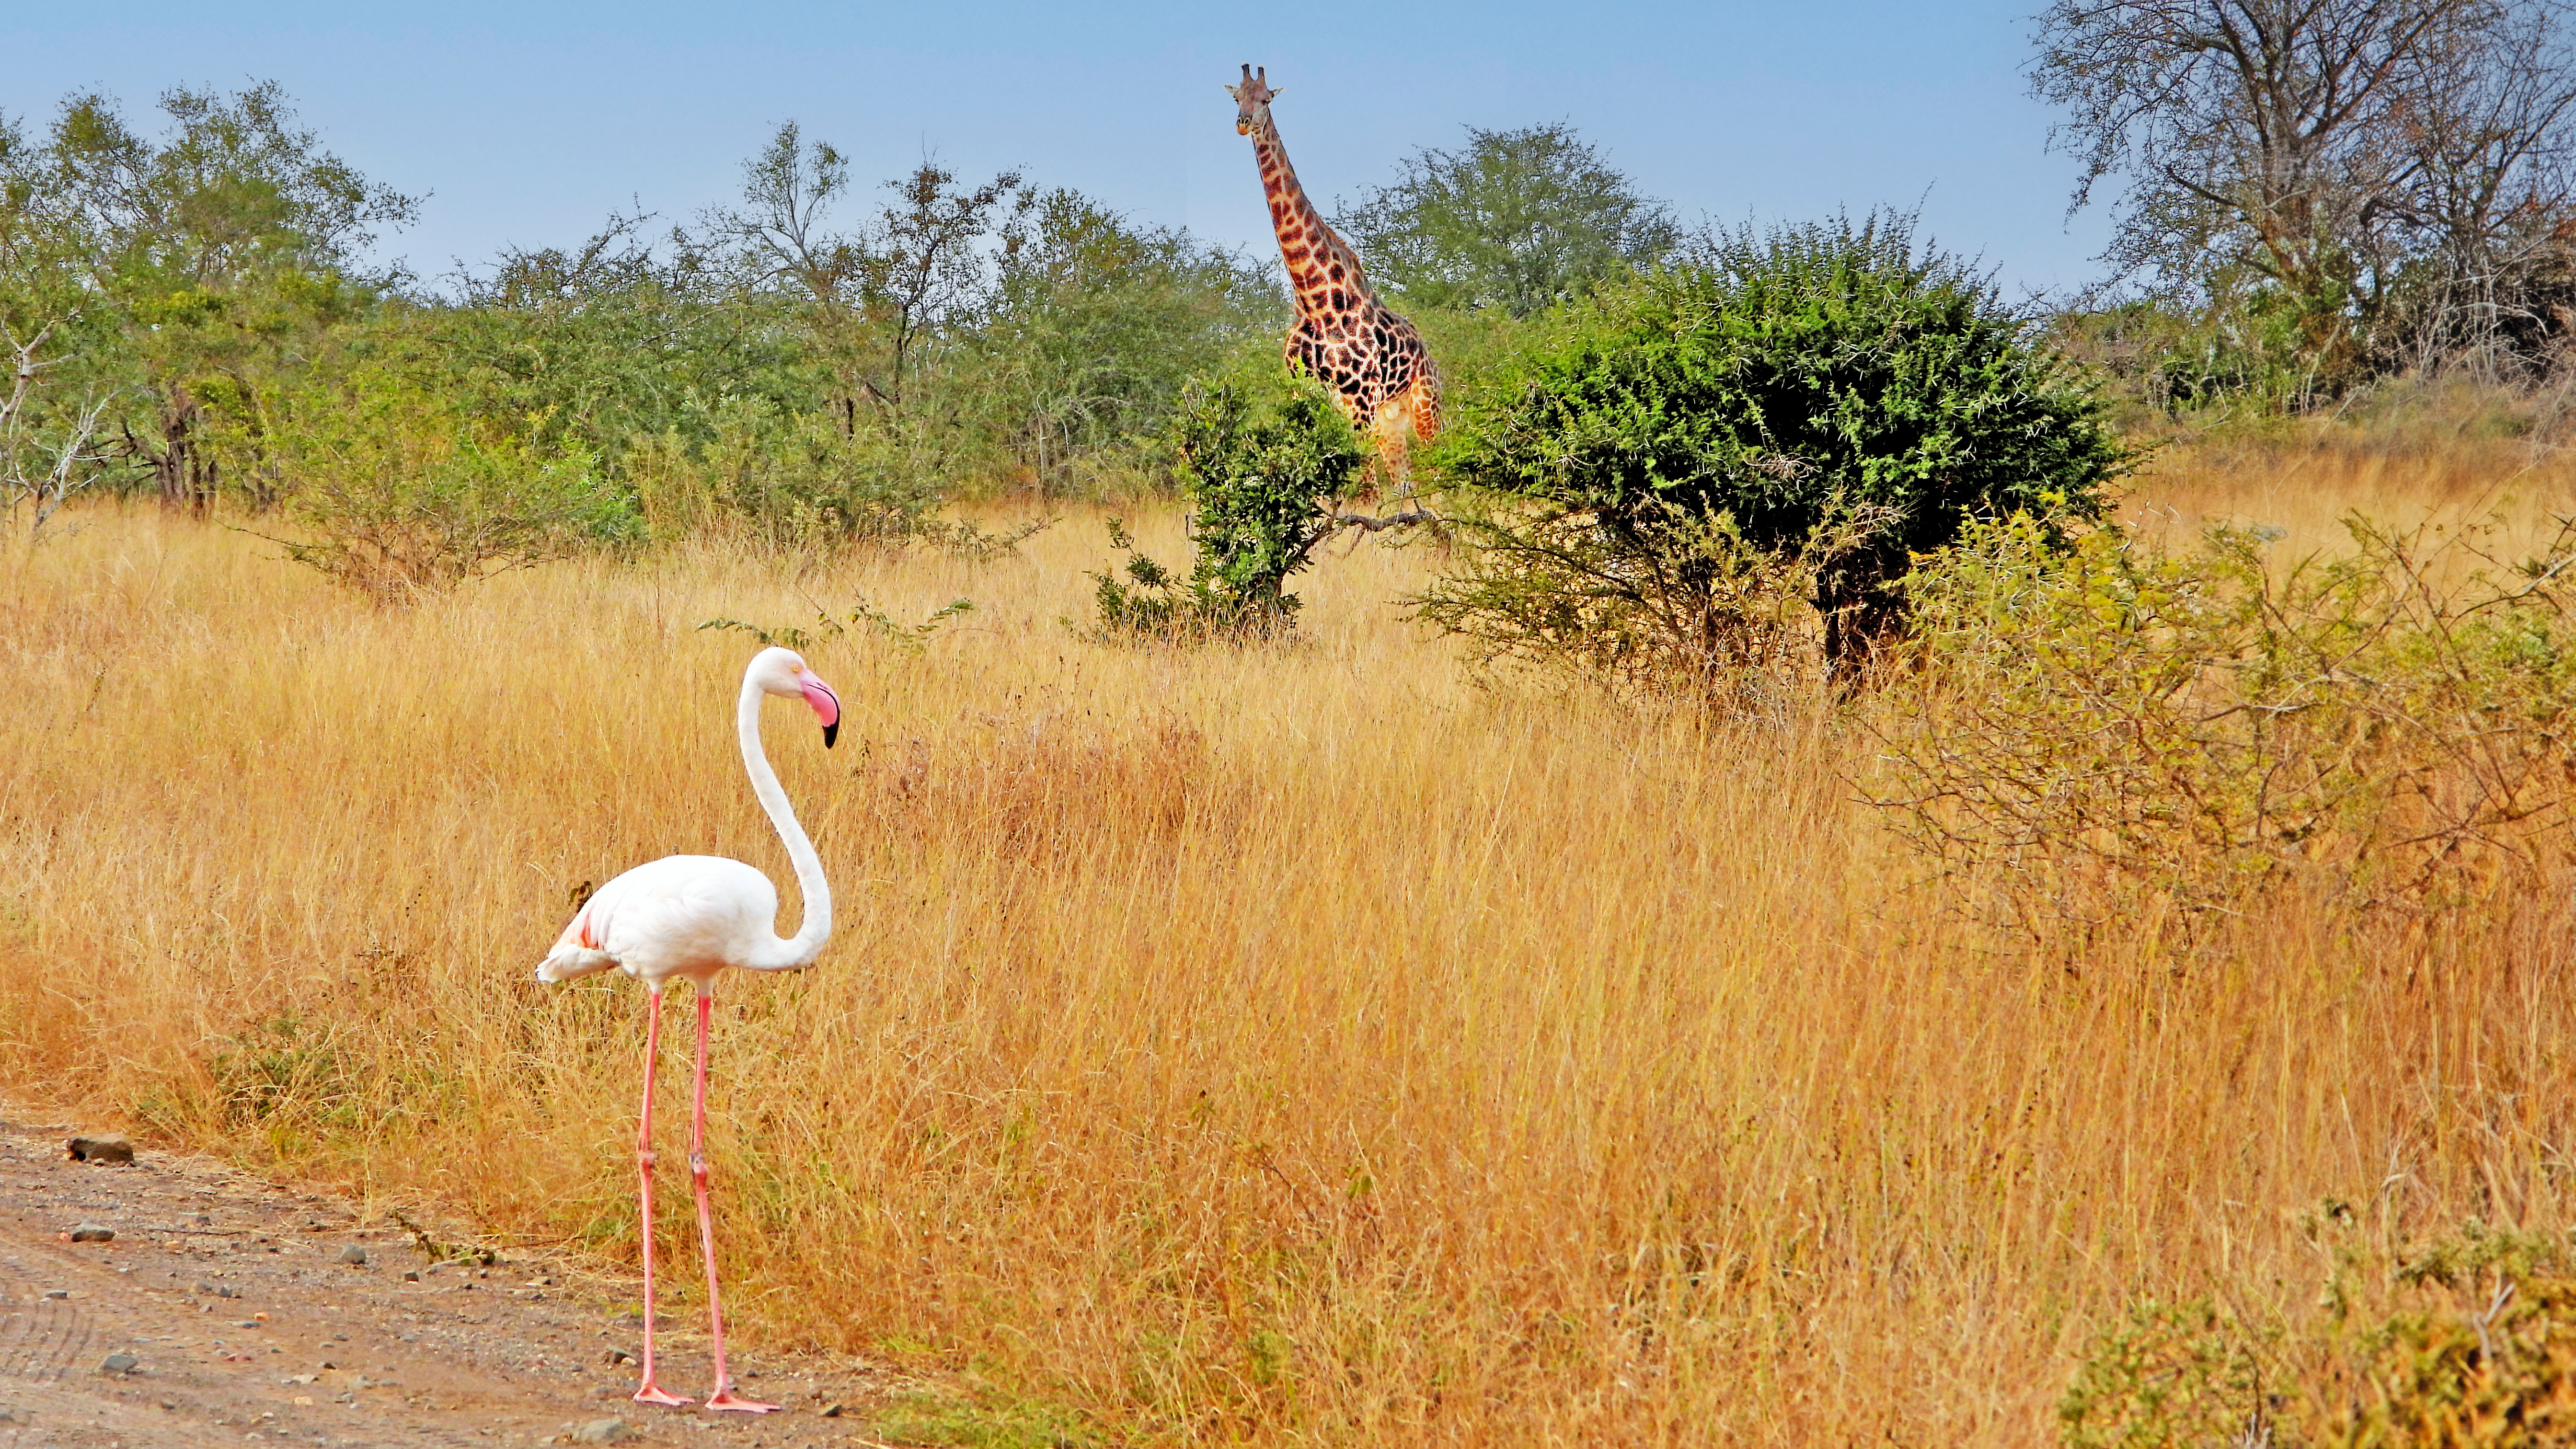 Surprise Sighting: Flamingo Spotted in the Kruger National Park